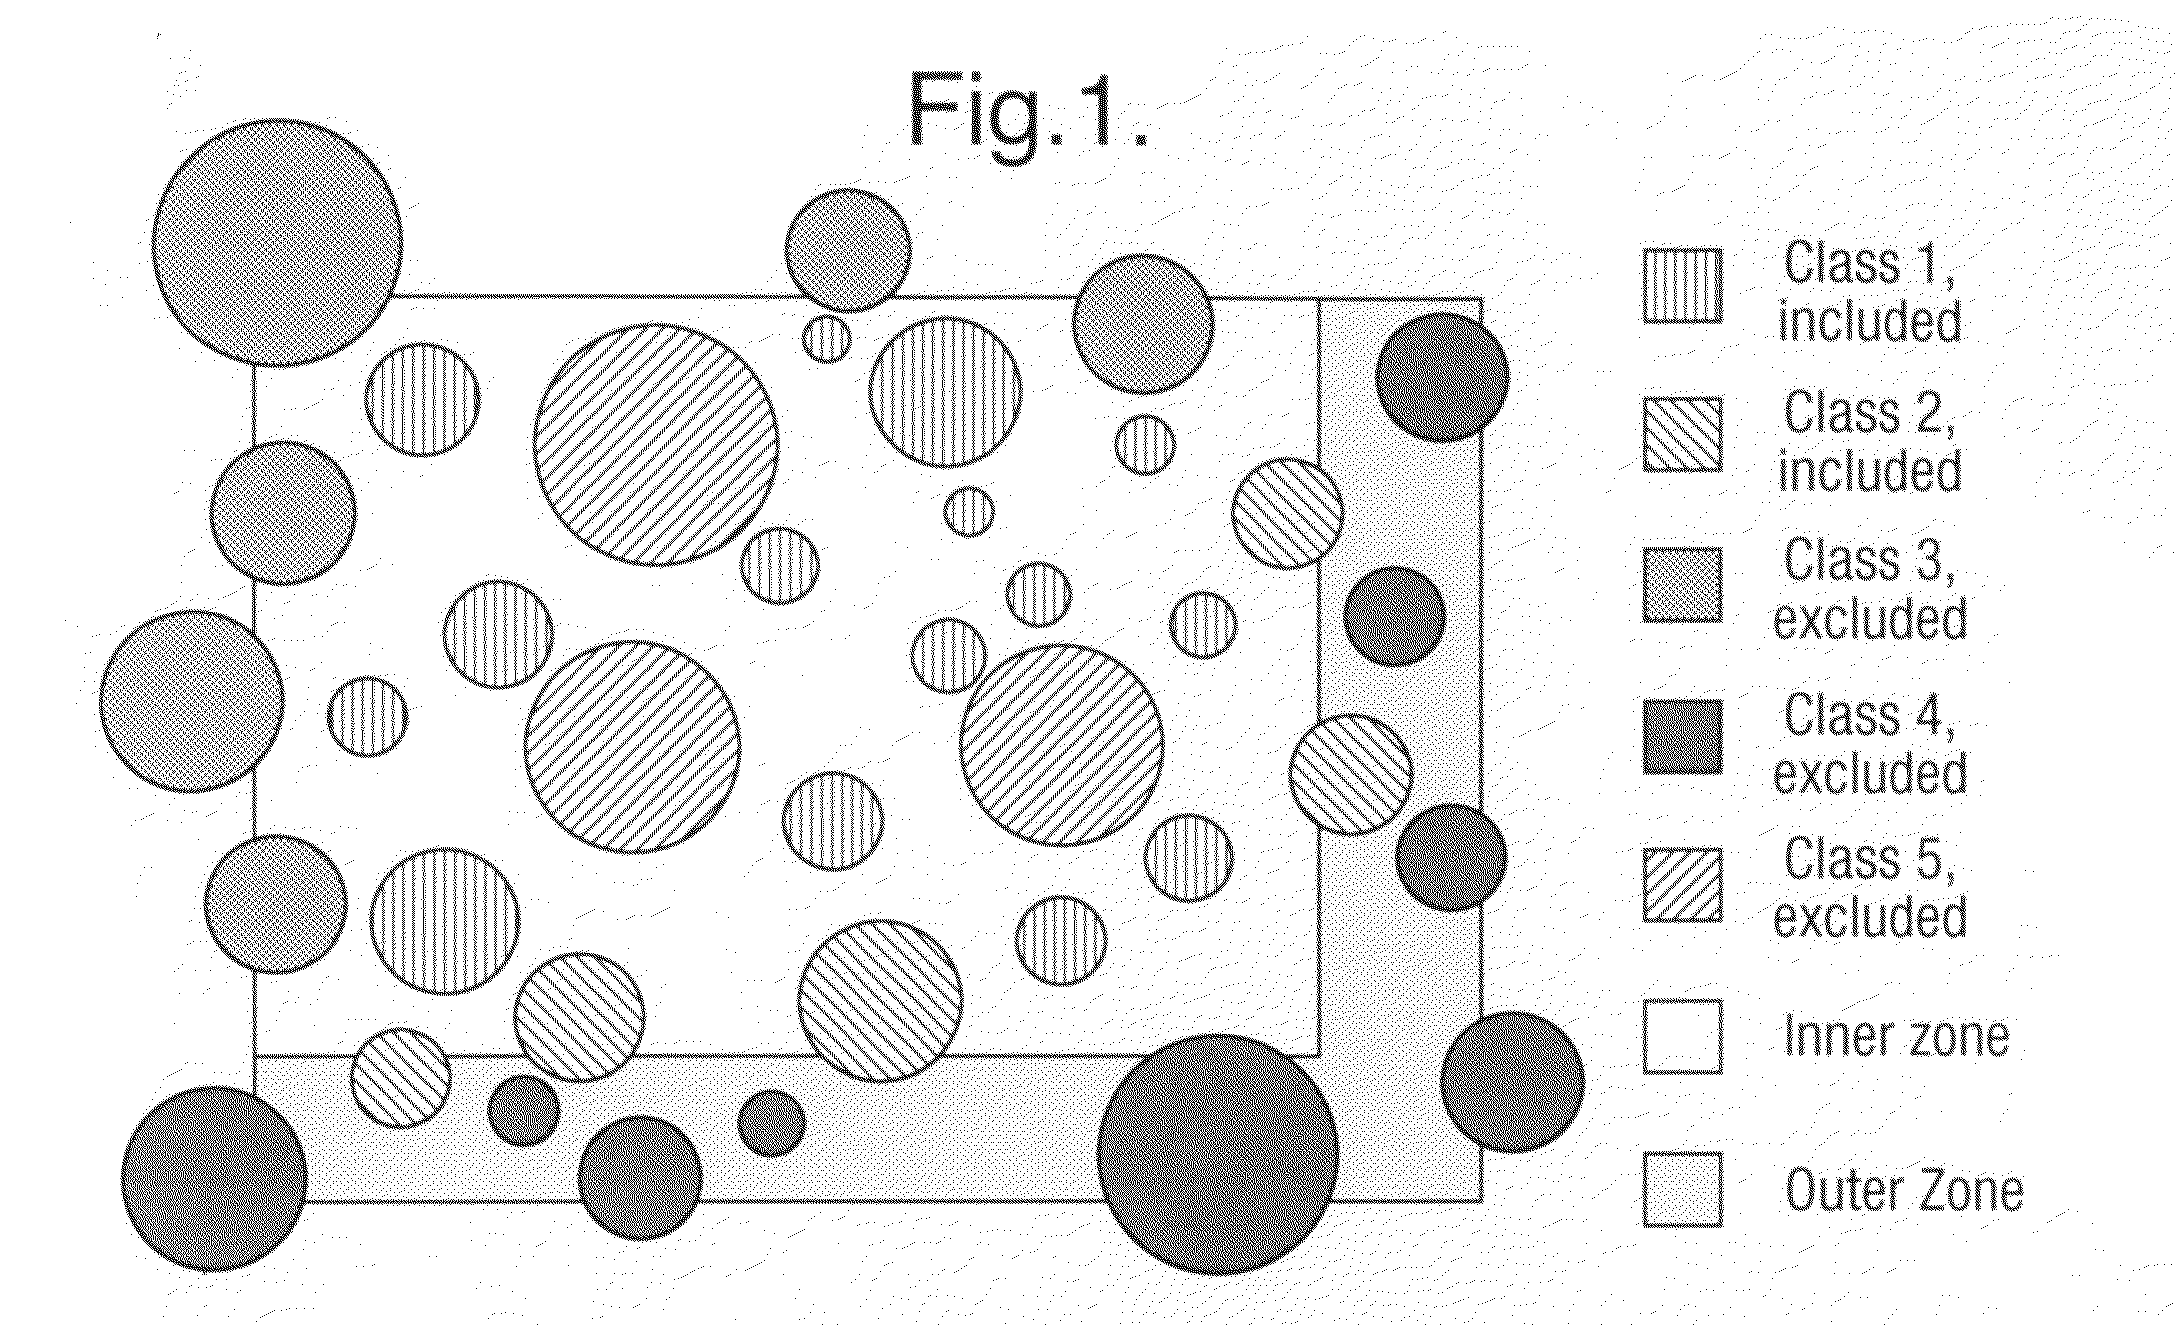 Aerated food products and methods for producing them